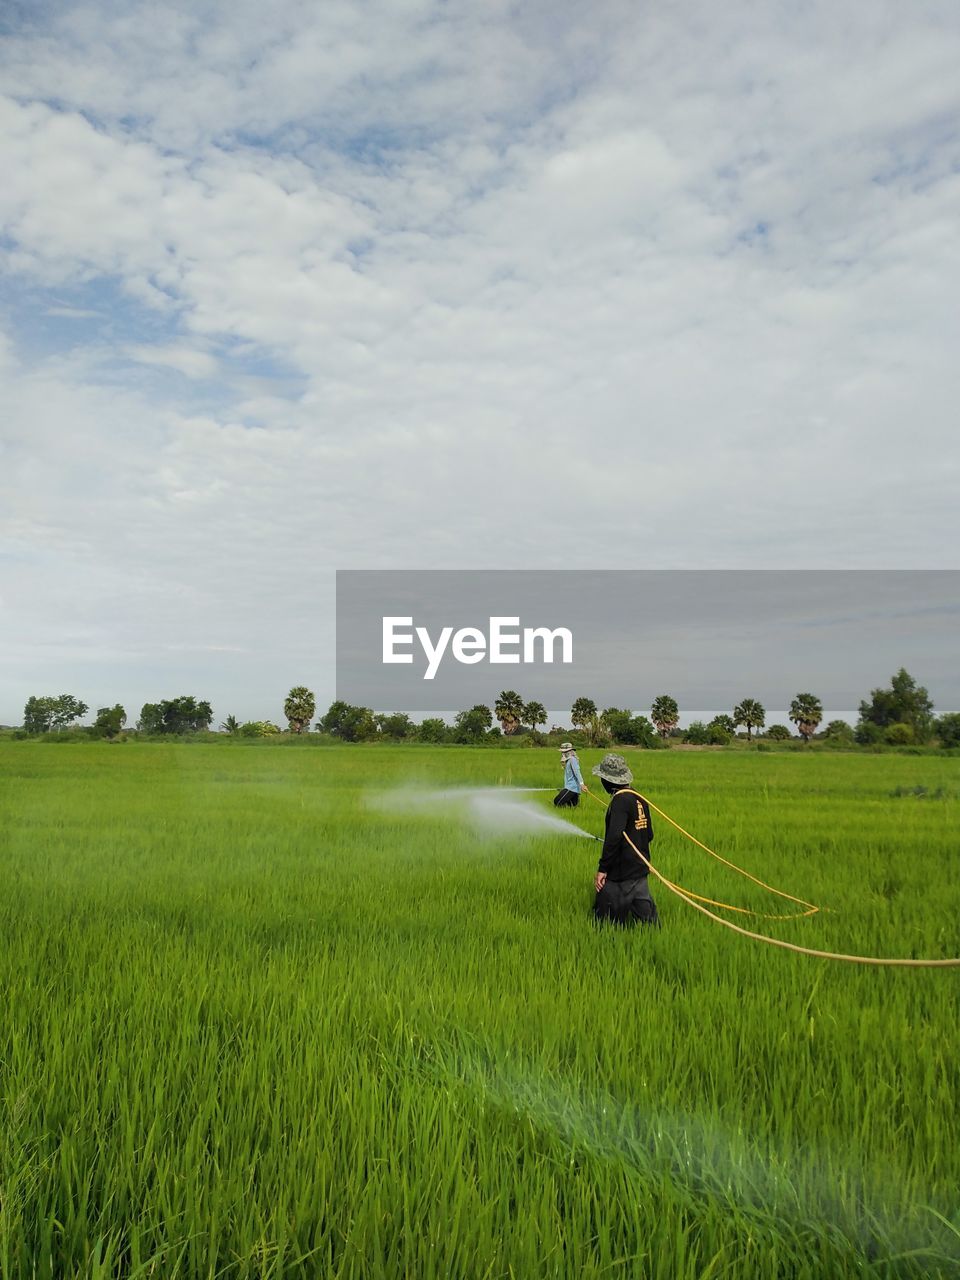 paddy field, field, landscape, agriculture, grassland, plant, rural scene, environment, land, plain, pasture, grass, sky, nature, crop, farm, meadow, cloud, rural area, green, growth, prairie, rice, rice paddy, occupation, cereal plant, scenics - nature, beauty in nature, farmer, rice - food staple, day, outdoors, tranquility, adult, working, food and drink, food, asian style conical hat, hill, tranquil scene, one person, social issues, horizon, soil, men, hat, environmental conservation